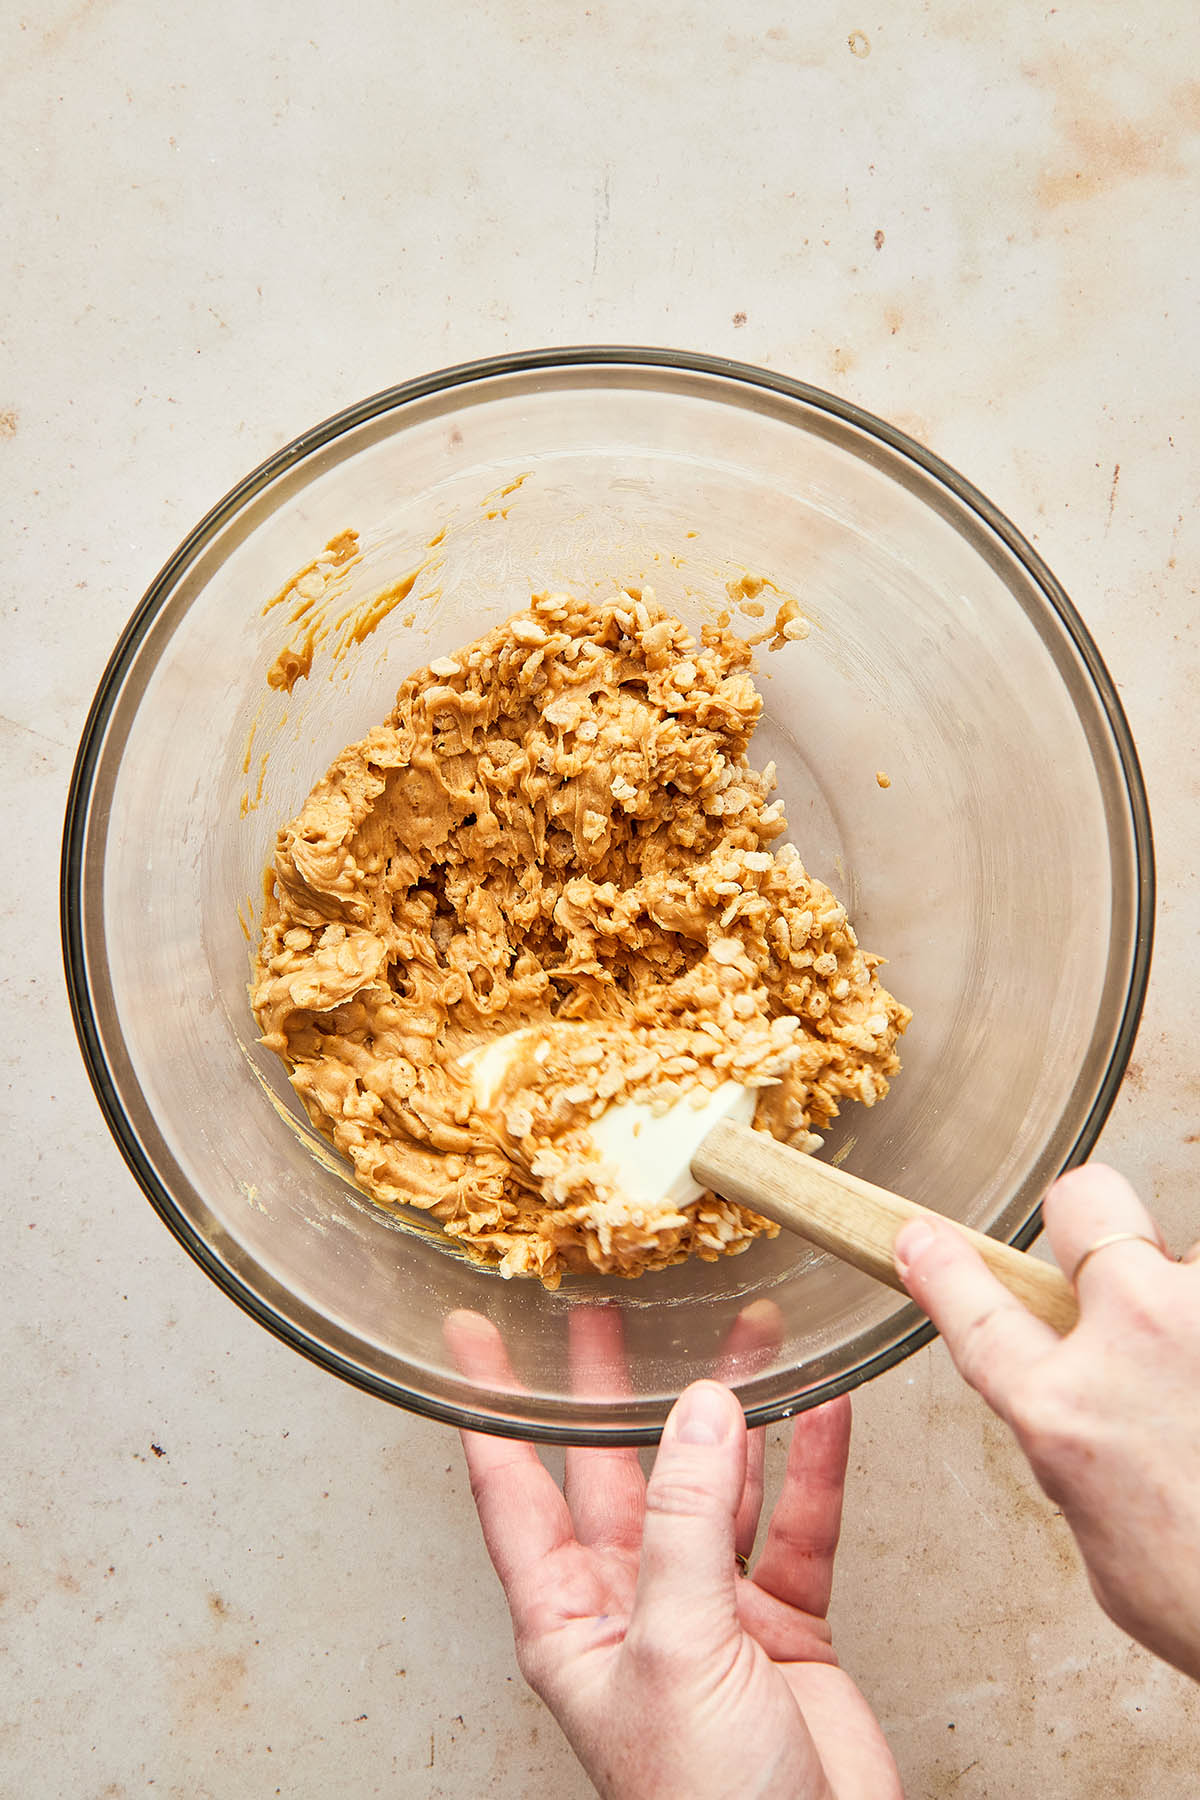 A hand using a rubber spatula to stir cereal and peanut butter together.